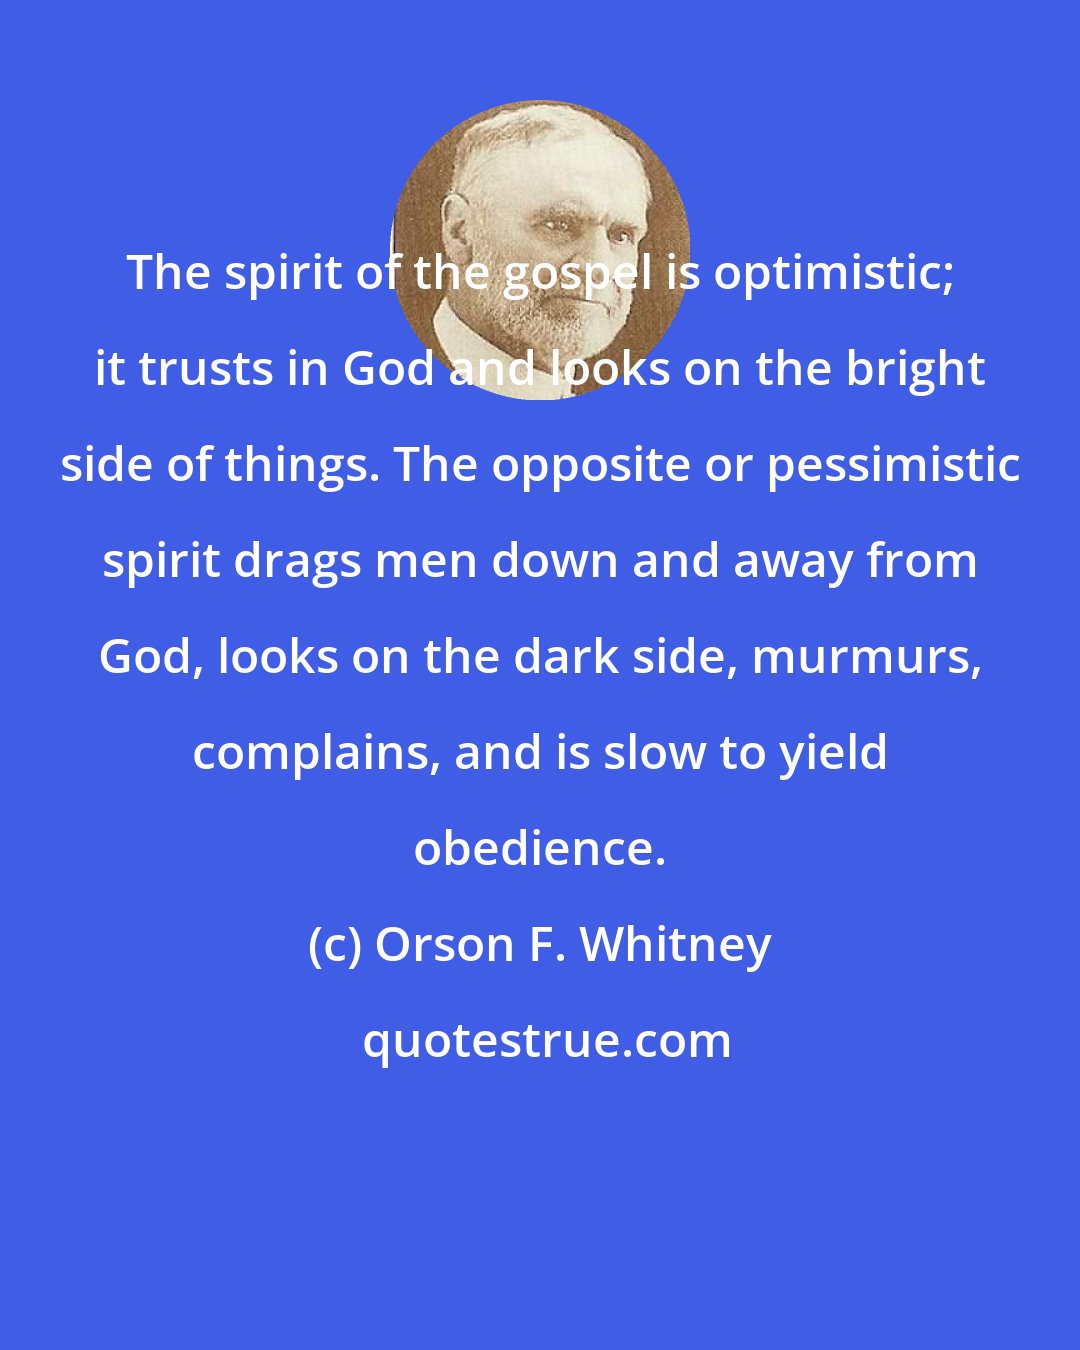 Orson F. Whitney: The spirit of the gospel is optimistic; it trusts in God and looks on the bright side of things. The opposite or pessimistic spirit drags men down and away from God, looks on the dark side, murmurs, complains, and is slow to yield obedience.